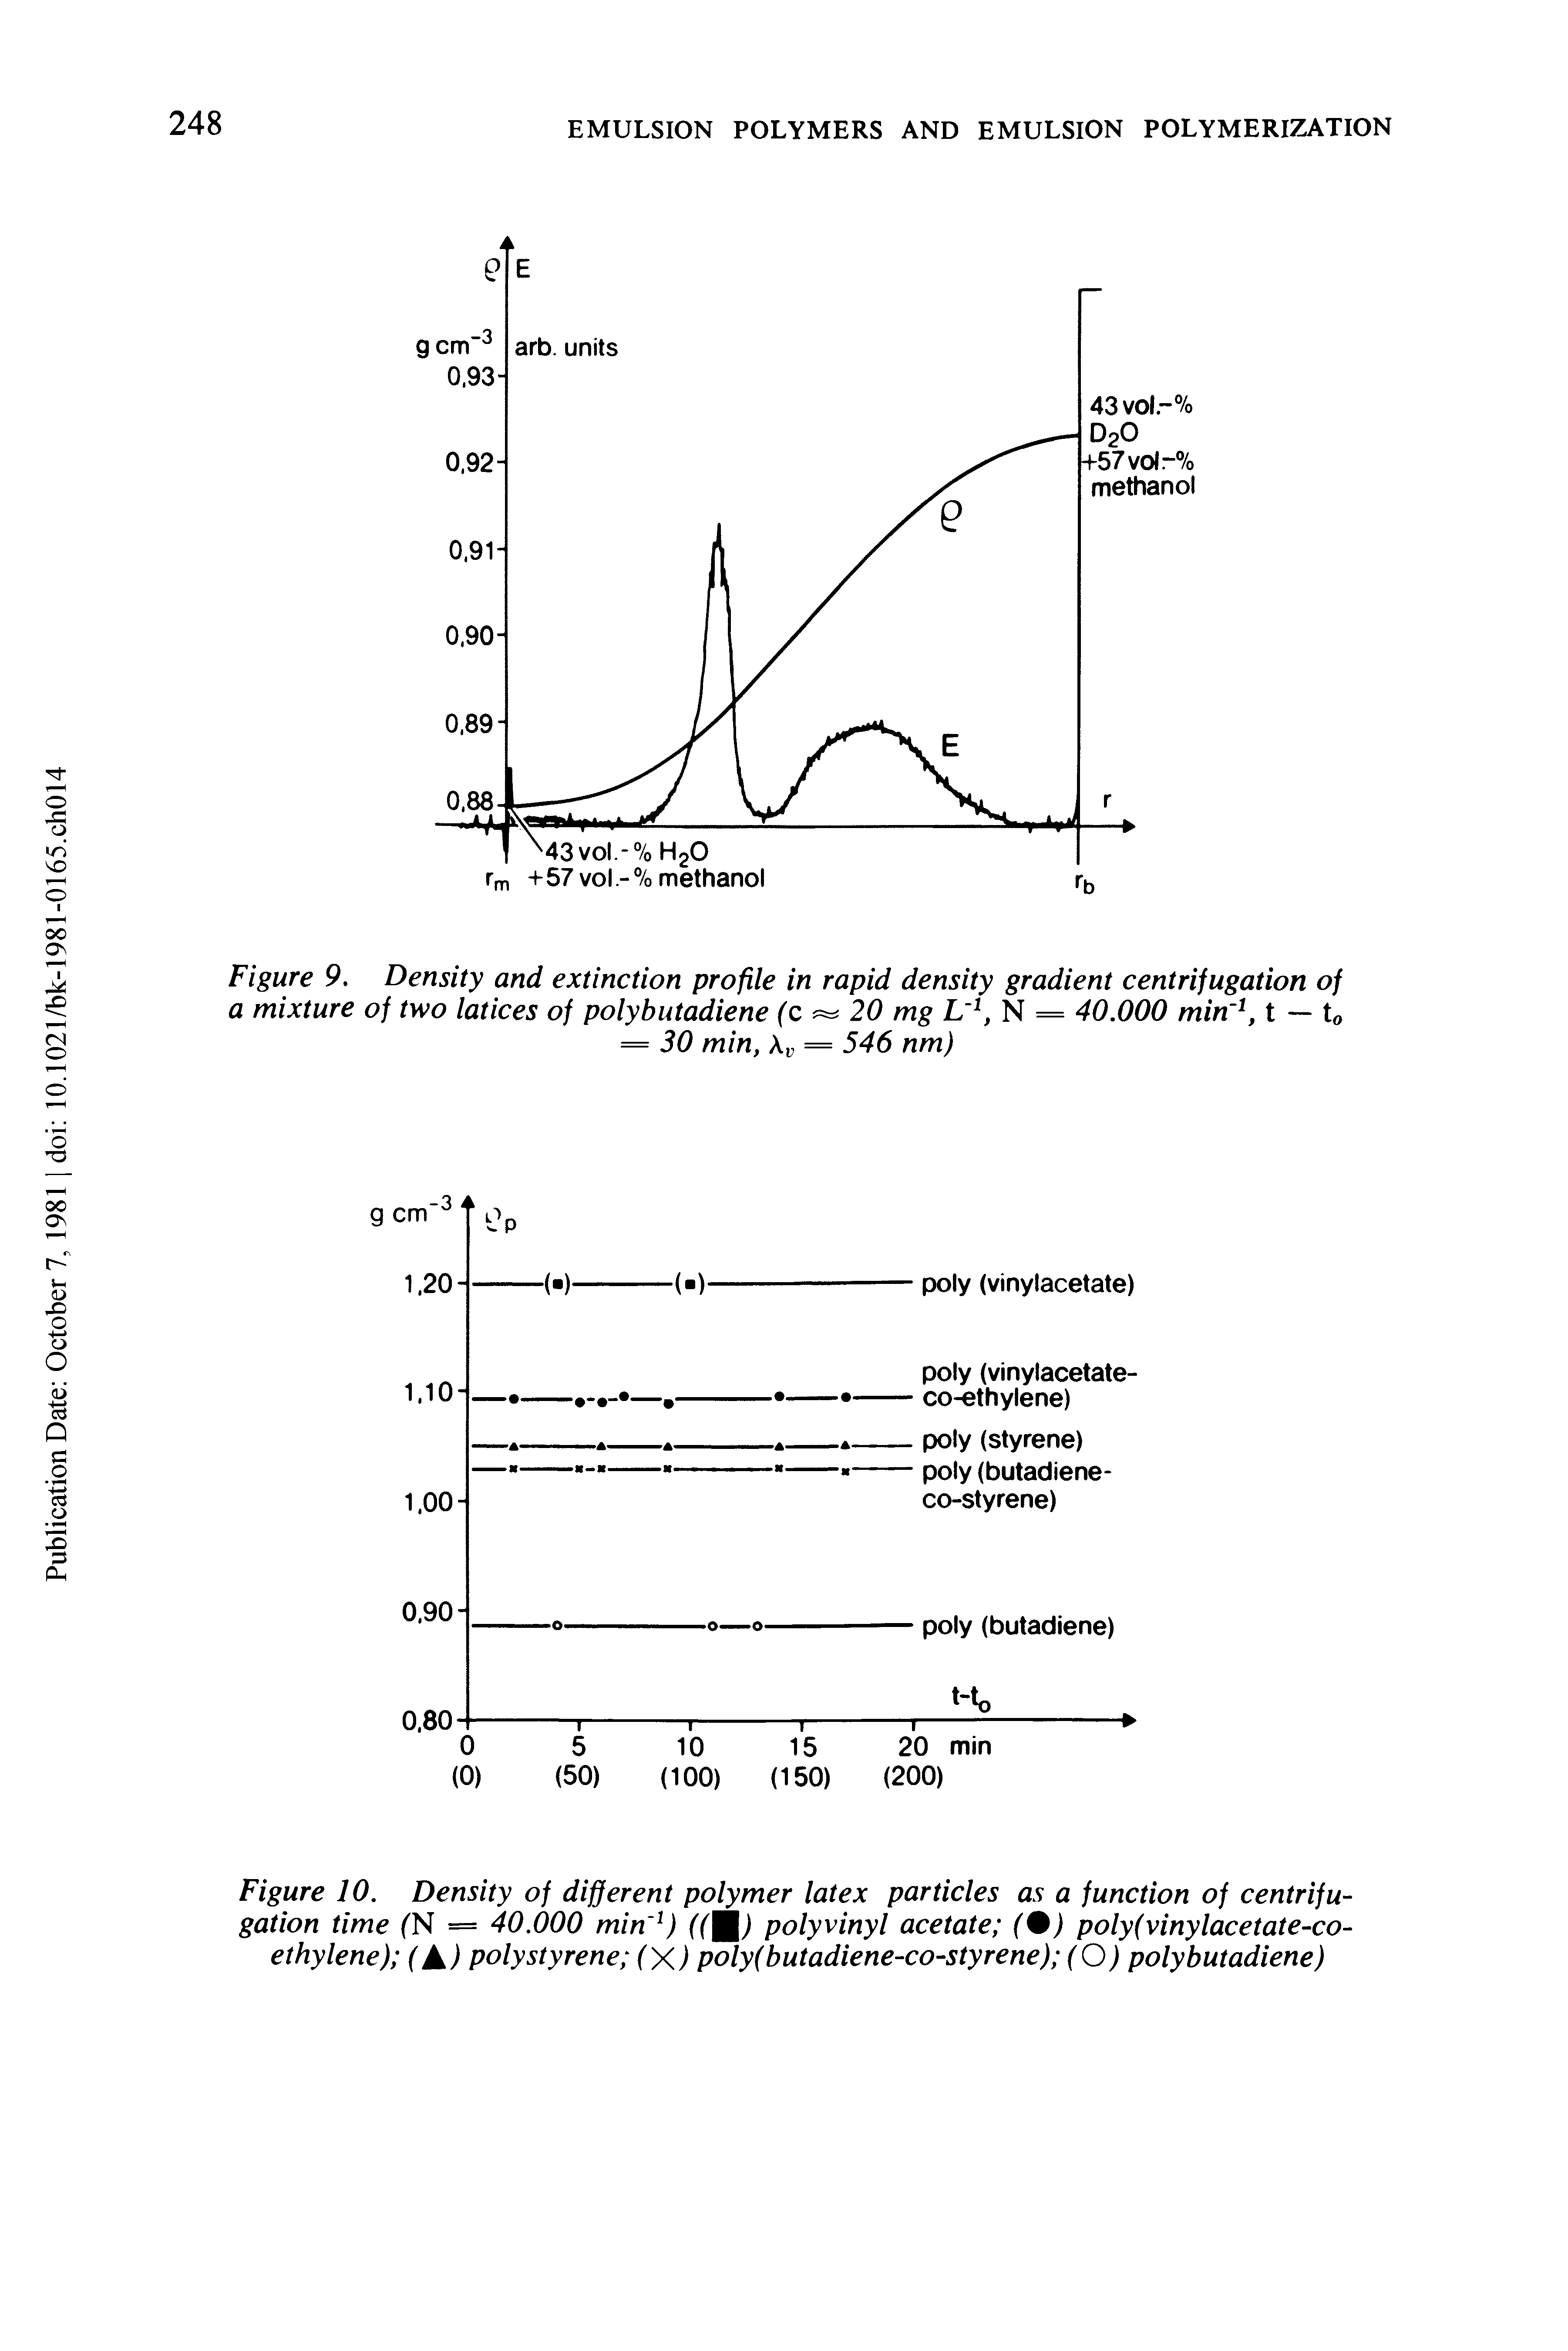 Figure 10. Density of different polymer latex particles as a function of centrifugation time (N = 40.000 min 1) (Y ) polyvinyl acetate (%) poly(vinylacetate-co-ethylene) (A) polystyrene (X) poly( butadiene-co-styrene) (O) poly butadiene)...